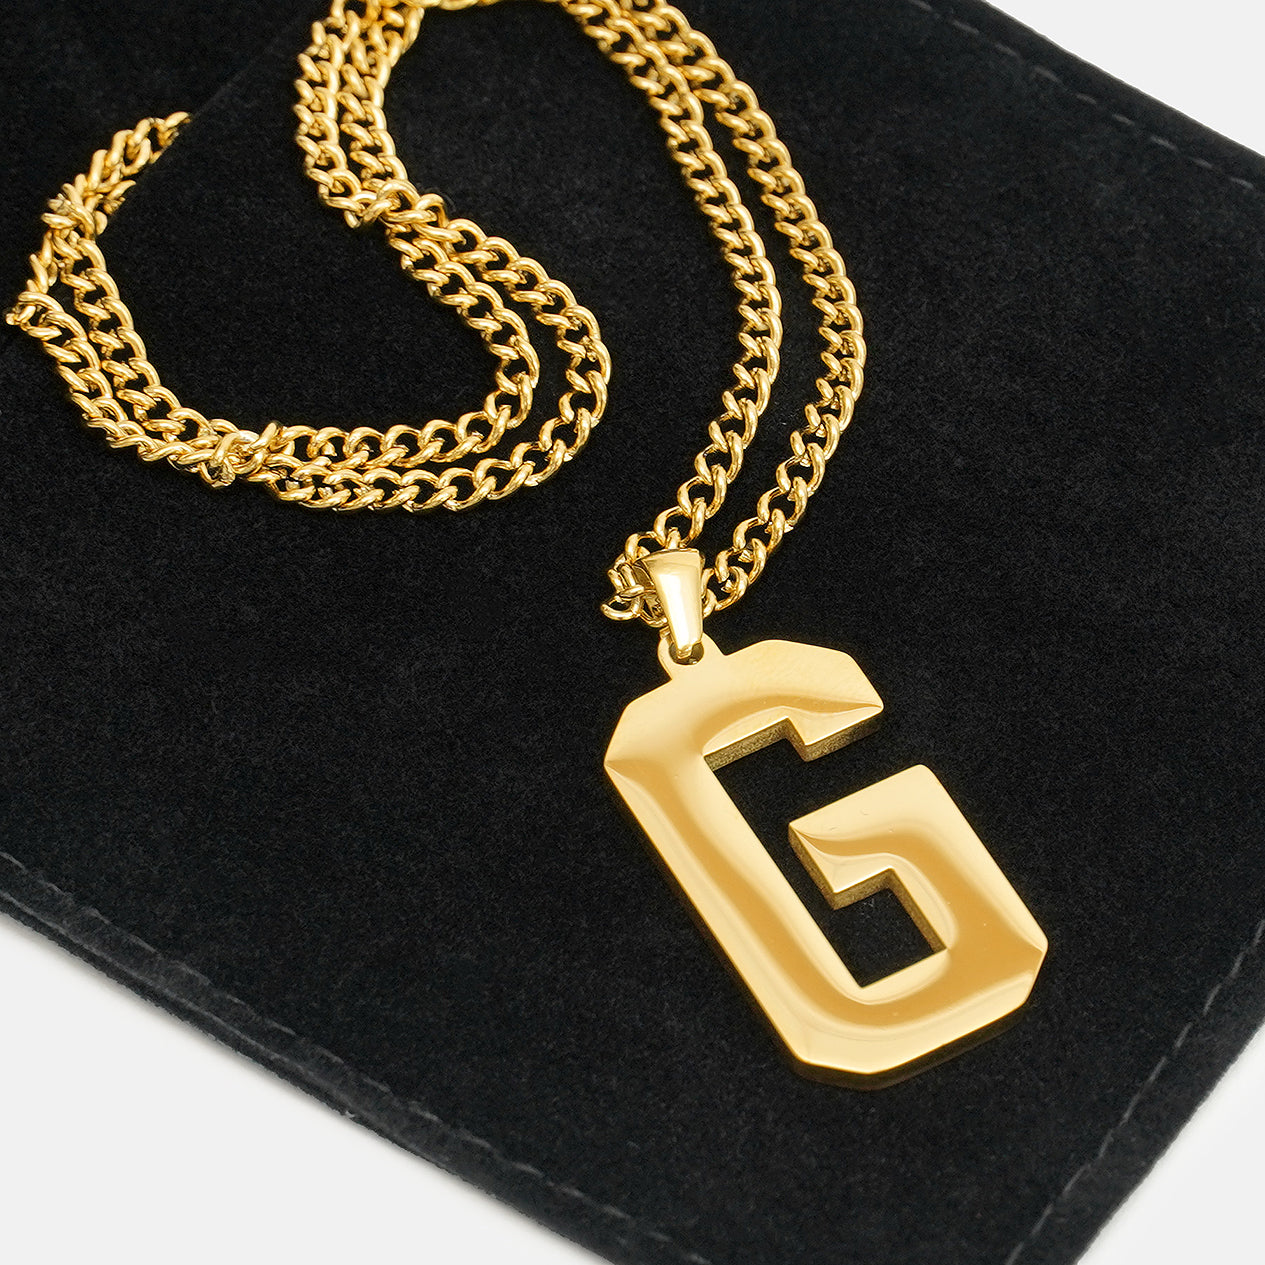 G Letter Pendant with Chain Necklace - Gold Plated Stainless Steel